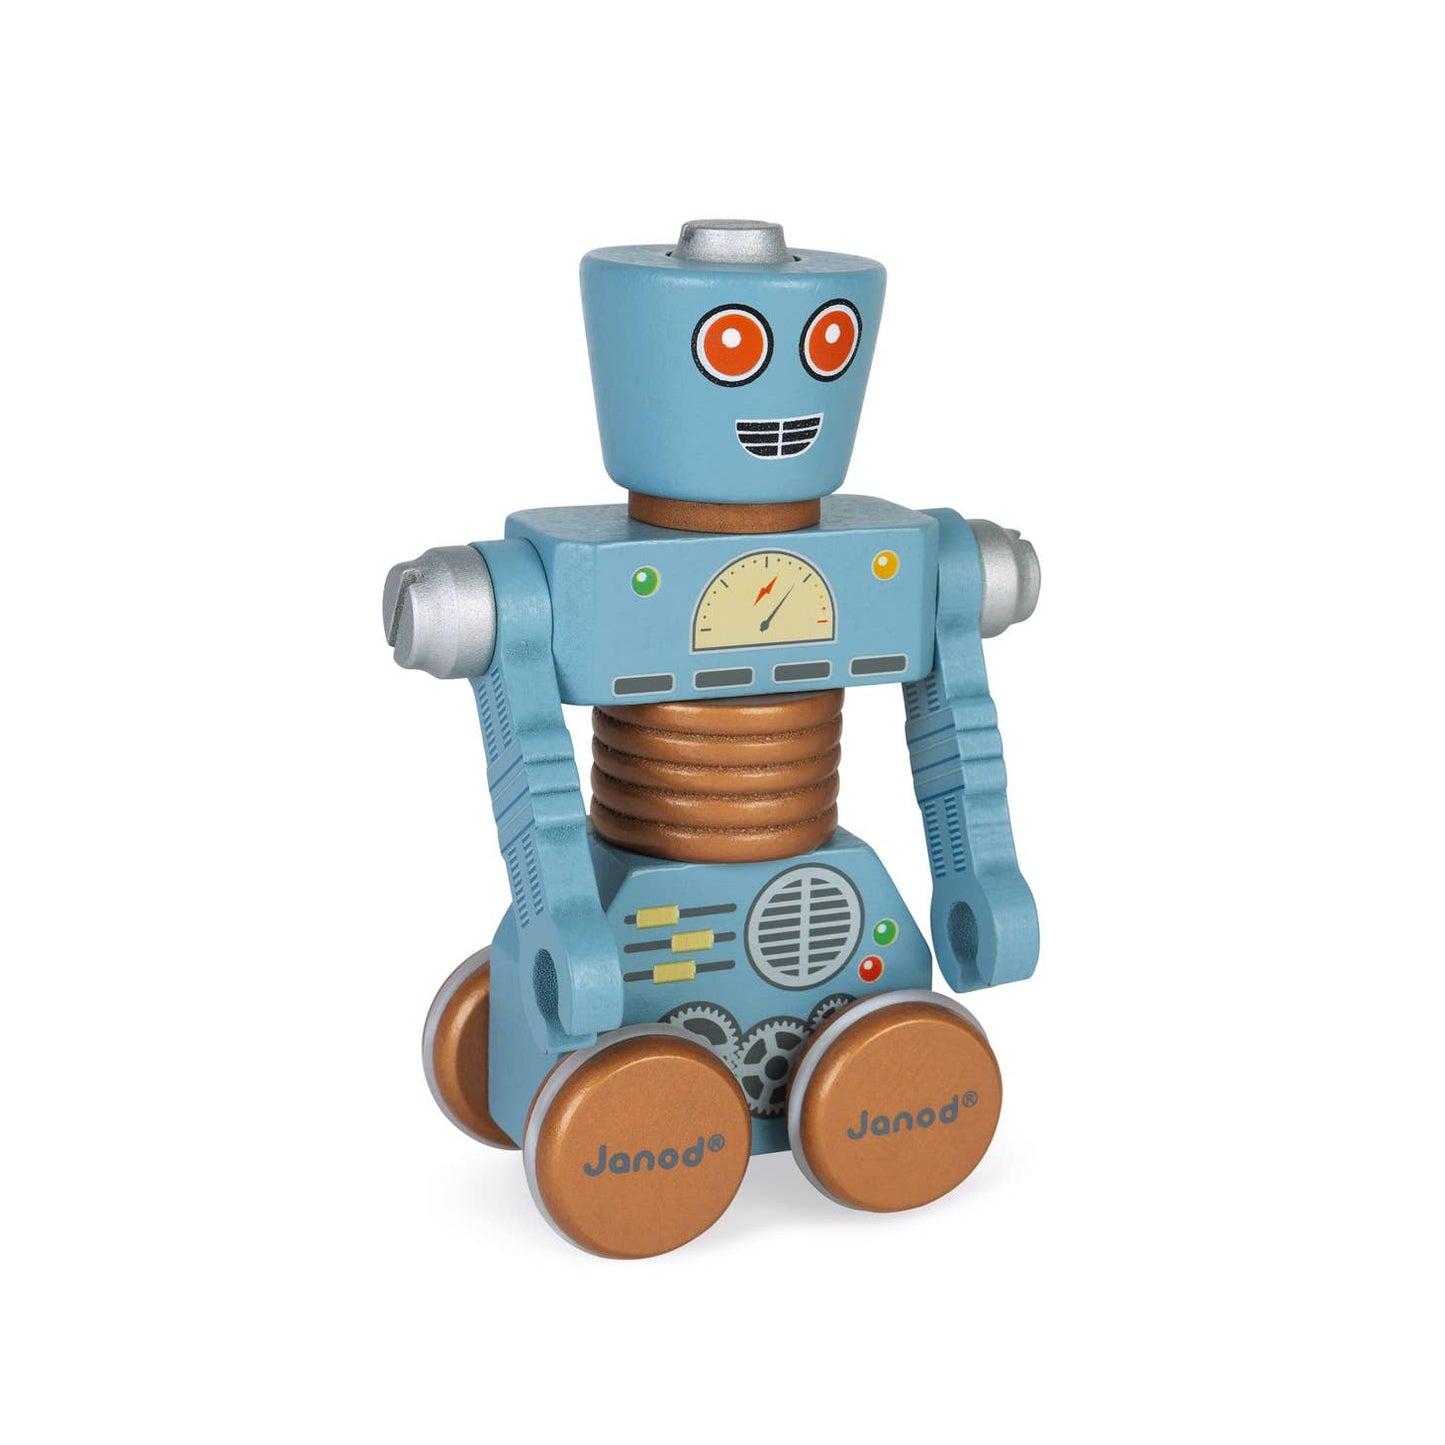 janod diy robots / 3 awesome robots to assemble, disassemble, and mix and match at will with the wooden screwdriver provided.  53 interchangeable pieces for lots of creative possibilities. An activity that develops your child’s fine motor skills, in addition to their imagination!